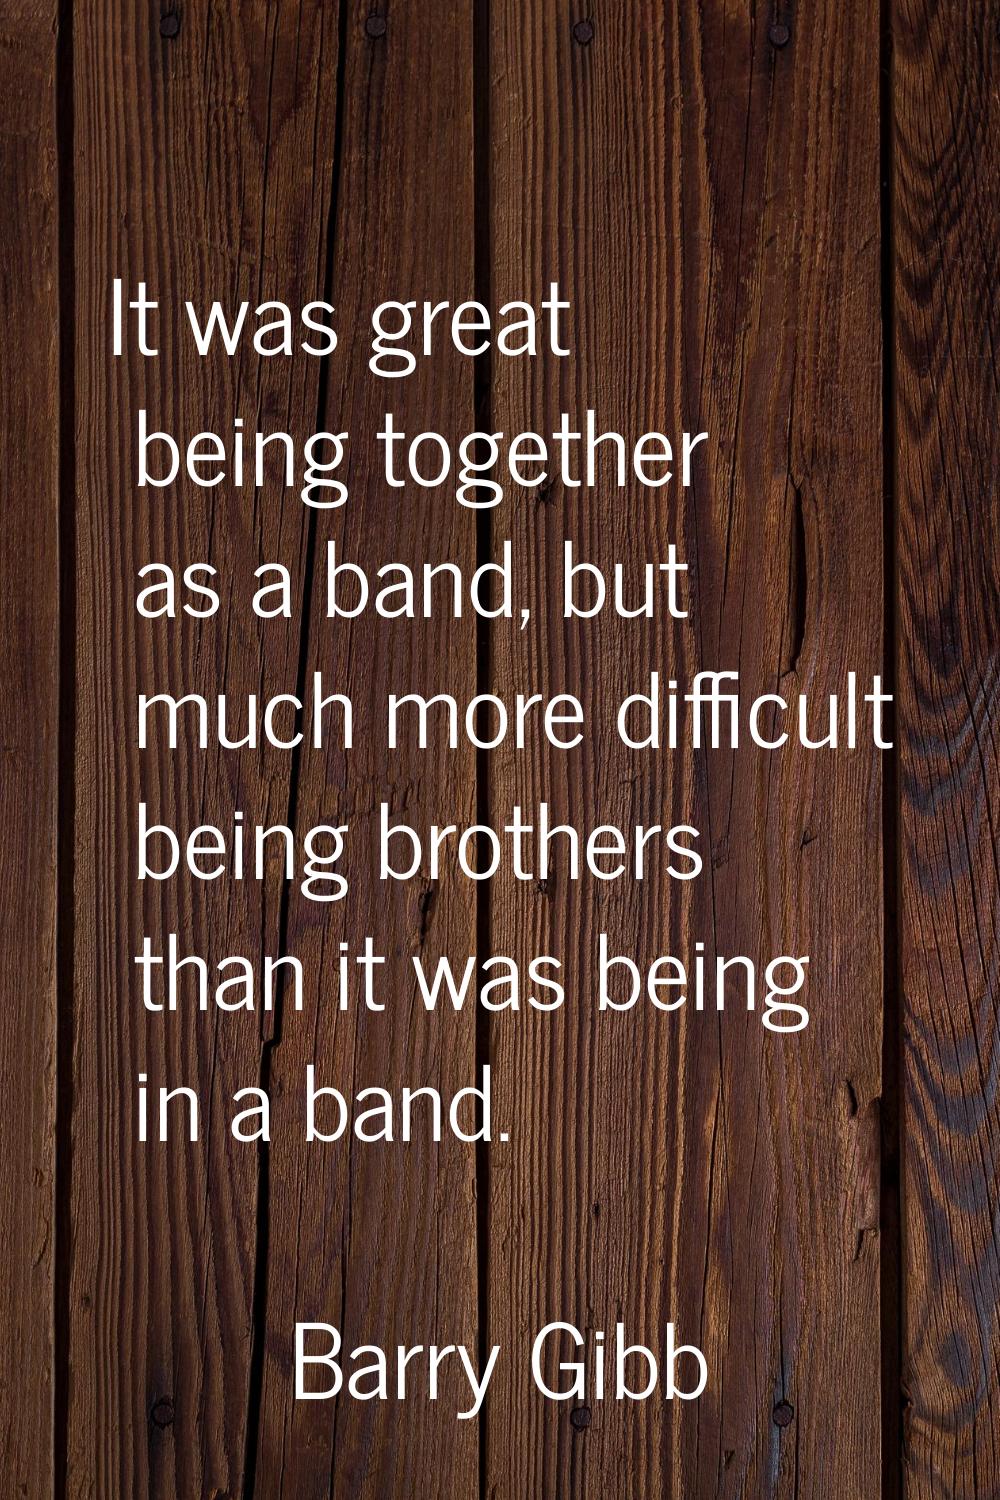 It was great being together as a band, but much more difficult being brothers than it was being in 